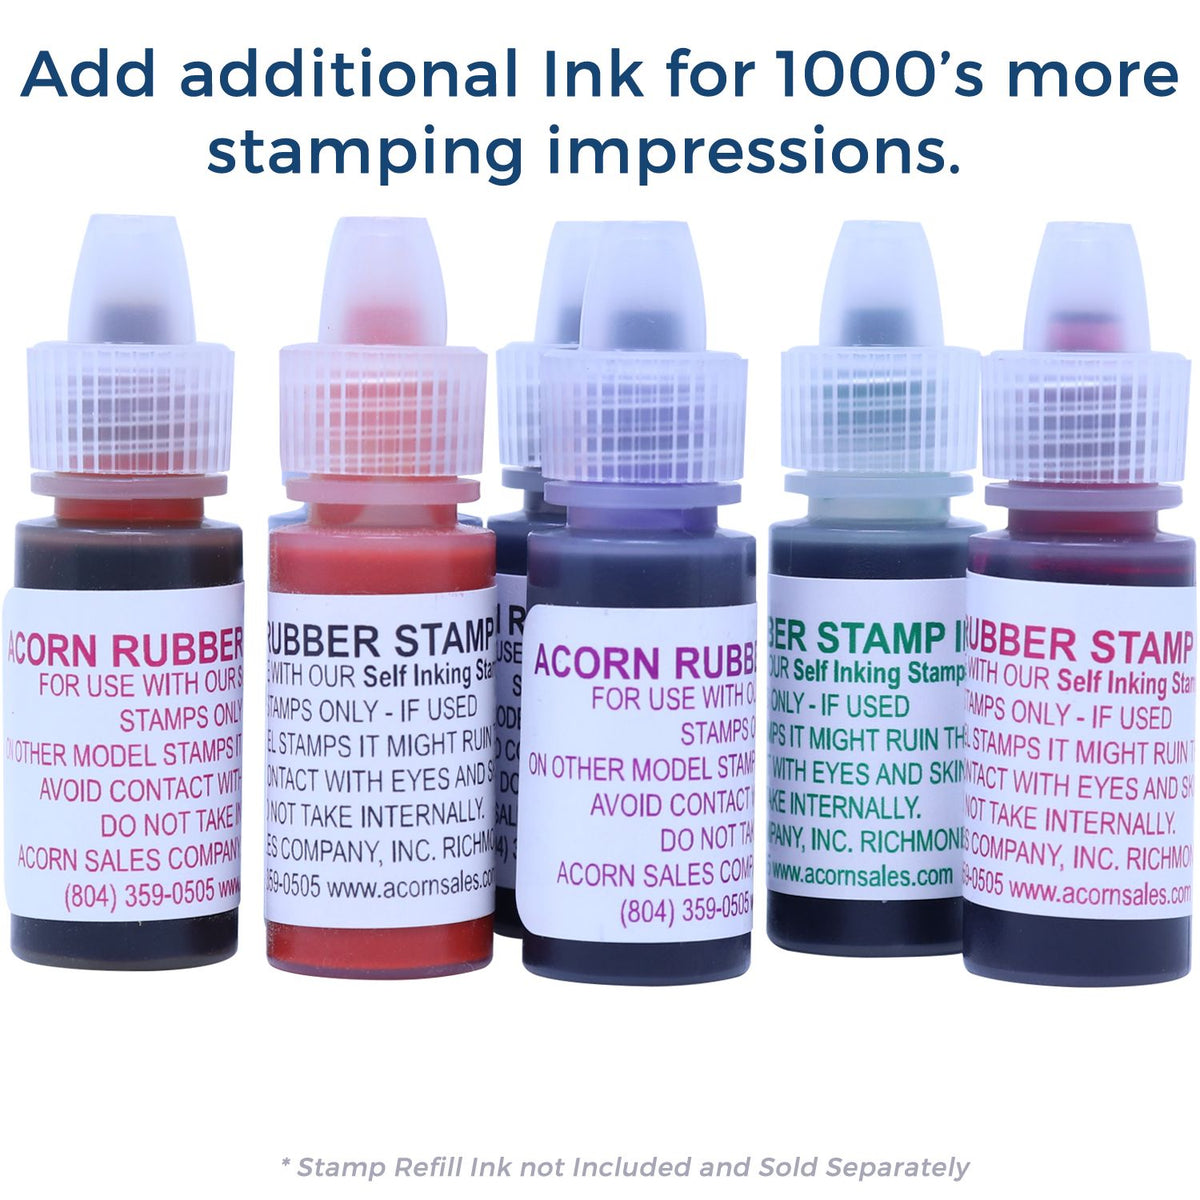 Refill Ink for Self-Inking Round FYI Stamp Available